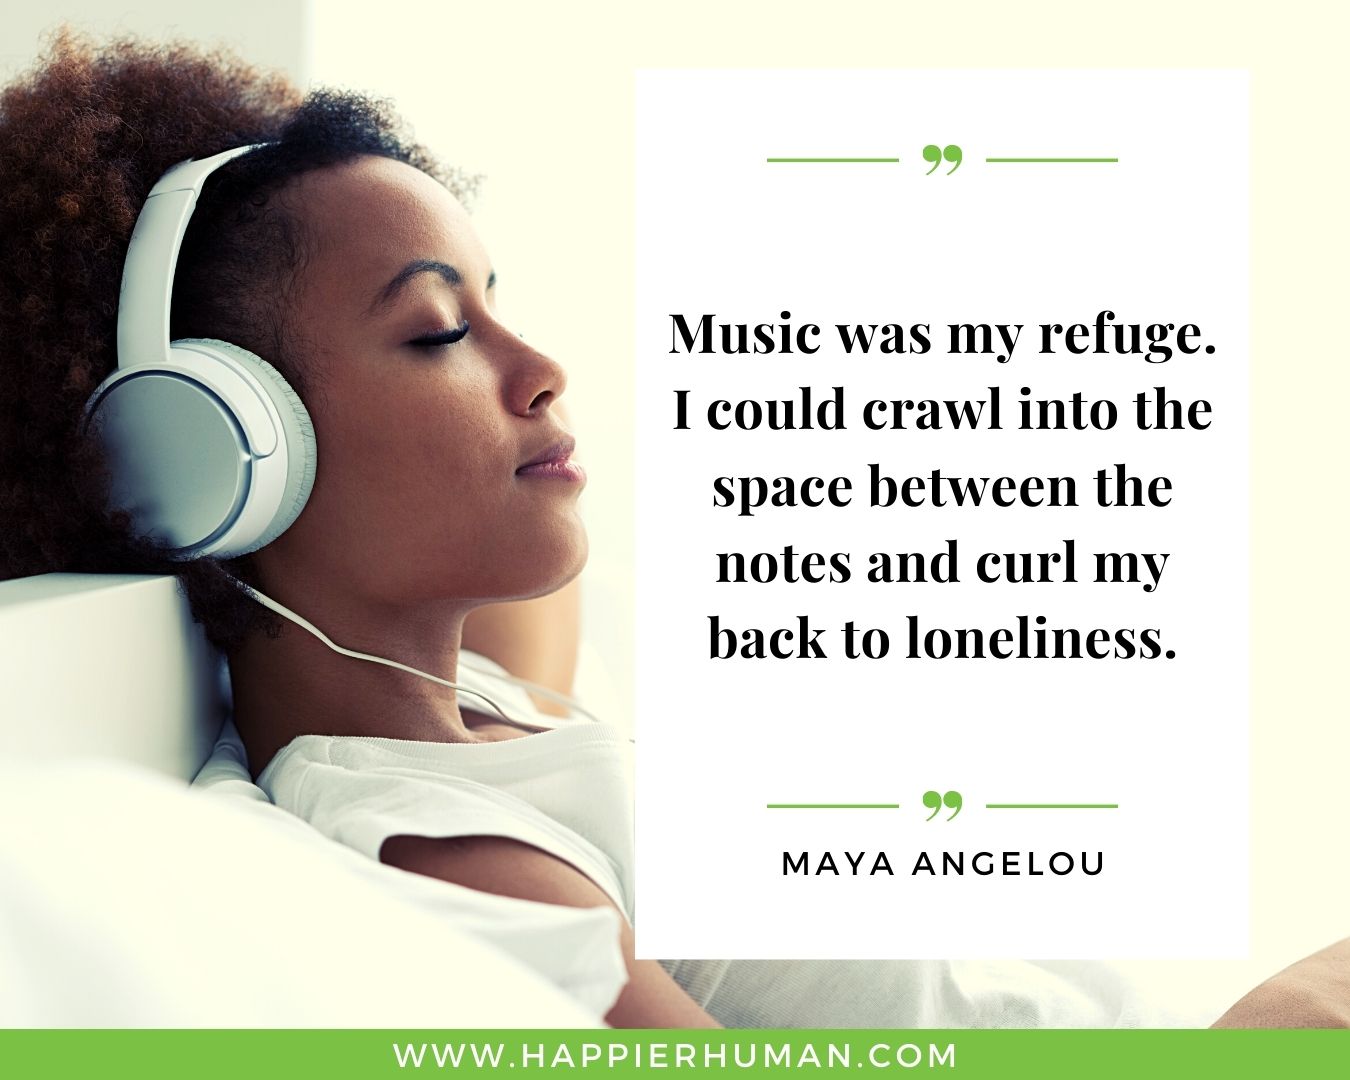 Loneliness Quotes - “Music was my refuge. I could crawl into the space between the notes and curl my back to loneliness.” – Maya Angelou